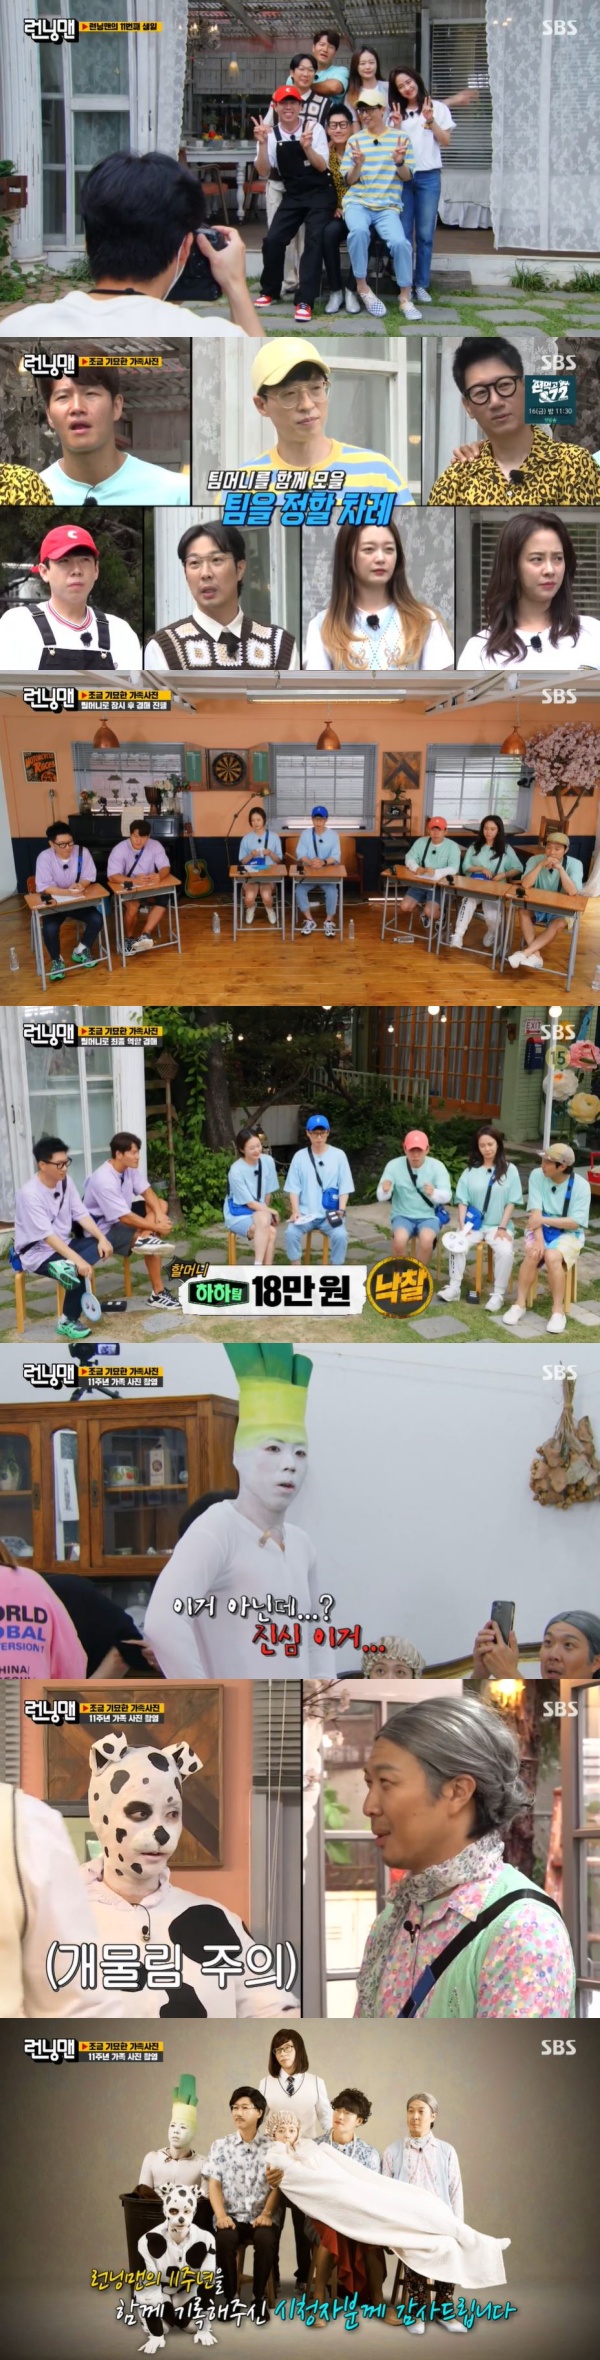 On the 11th SBS entertainment program Running Man, the members who went to Race on the 11th anniversary were portrayed.The show opened its 11th birthday; the production team prepared a slightly quirky Family Portrait Race, the show said.Haha, Yang Se-chan and Song Ji-hyo became a team.Yoo Jae-Suk and Jeon So-min, Kim Jong-kook and Ji Suk-jin teamed up.The members participated in the Find a Jesse word in a Roadview mission; Yoo Jae-Suk and the Jeon So-min team scored at the last minute and won the first place.Kim Jong-kook and Ji Suk-jin team finished bottom.The members hosted the final mission of A Little Strange Family Portrait: Seeing Only Eyes; Ji Suk-jin asked, How about the headman?Kim Jong-kook said, I do not know these words, and I will not use it until I die? Haha, Yang Se-chan and Song Ji-hyo team provoked.The first-round Kim Jong-kook and Ji Suk-jin teams have been in trouble since the start; Kim Jong-kook explained in length to avoid being banned. (The forbidden language) was really good, said Haha, who saw it.Kim Jong-kook laughed at Ji Suk-jin, who mentioned the extension prohibition, saying, This is a quiz that explains this hard.The new strategy was made by Yoo Jae-Suk and Jeon So-min, who easily hit the first problem.When we saw the Ji Suk-jin issue, Yoo Jae-Suk wittyly explained Inspiration Running Man; so, Jeon So-min easily got the right answer.However, the team Yoo Jae-Suk and Jeon So-min mentioned the extension ban in the Vietnam Ssam issue; the production team said, I mentioned all the bans 16 times, and laughed.Haha, Yang Se-chan and Song Ji-hyo, who answered the correct answer, were confused about the official of the roots.The Haha team managed to get the round formula correct answer after numerous misrepresentations; eventually the Haha, Yang Se-chan and Song Ji-hyo teams won the first place.We will proceed with a role auction to set the role of the final Family Portrait, the production team said.The Ji Suk-jin team spent a lot of money and won the father role.Song Ji-hyo found Haha and Yang Se-chan submitted fewer team money; he was frustrated that he only paid me.But Song Ji-hyo also left a lot of money to embarrass the members.The members hosted the 11th anniversary Family Portrait shoot; Song Ji-hyo, dressed as a Dalmatian, was anxious, saying, Is everything okay?Yang Se-chan, who saw the makeup, laughed at the embarrassment that Kobic did not do this. The members finished filming the 11th anniversary Family Portrait at the end of twists and turns.Meanwhile, Running Man is an entertainment program that Korean stars play games and missions together and give laughter. It broadcasts every Sunday at 5 p.m.